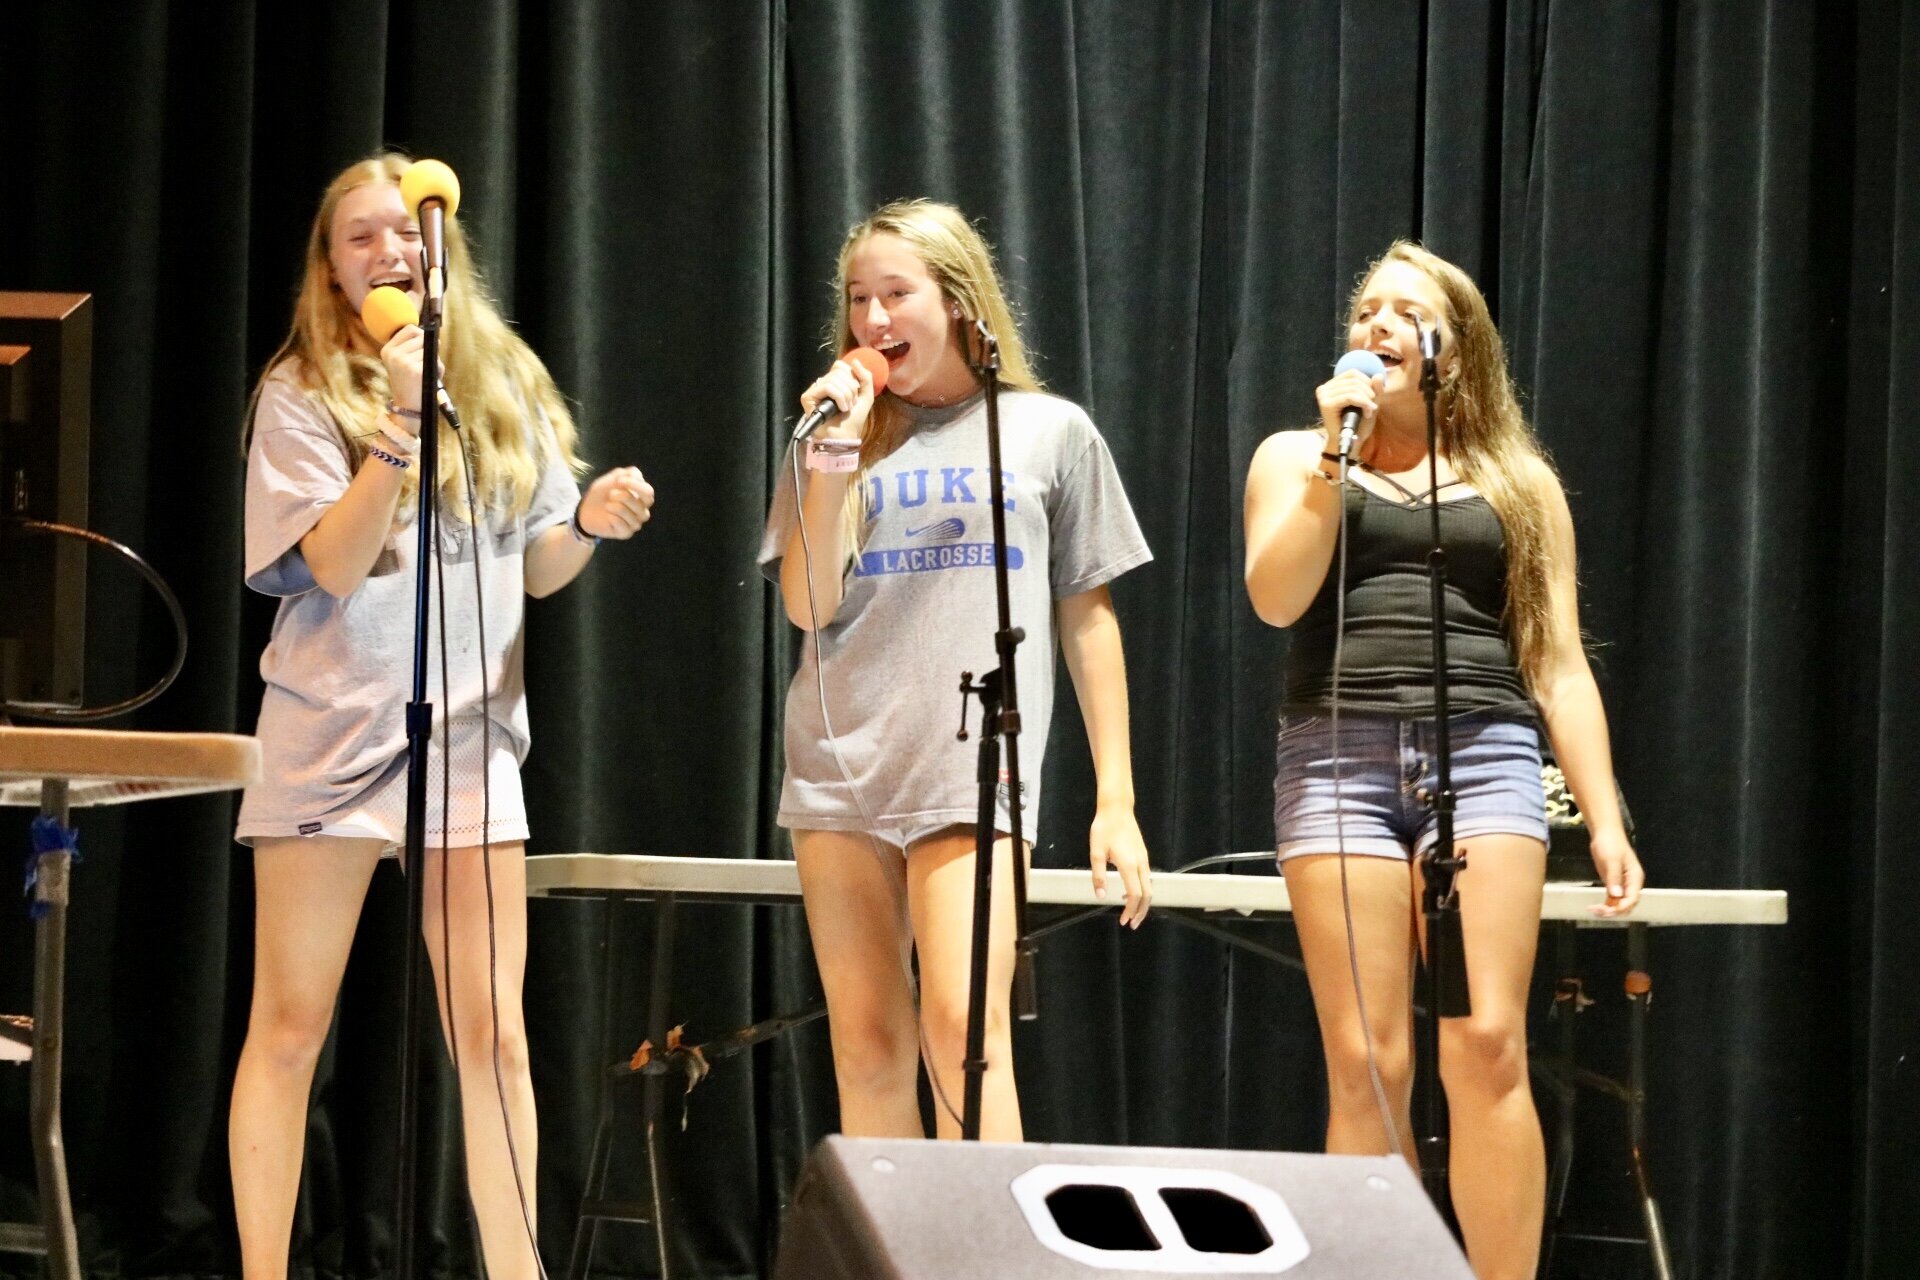 Kaitlyn Hnatkowsky, Mia Vazquez, Averie Schnupp performed at one of the 2018 Acoustic Open Mic Nights.